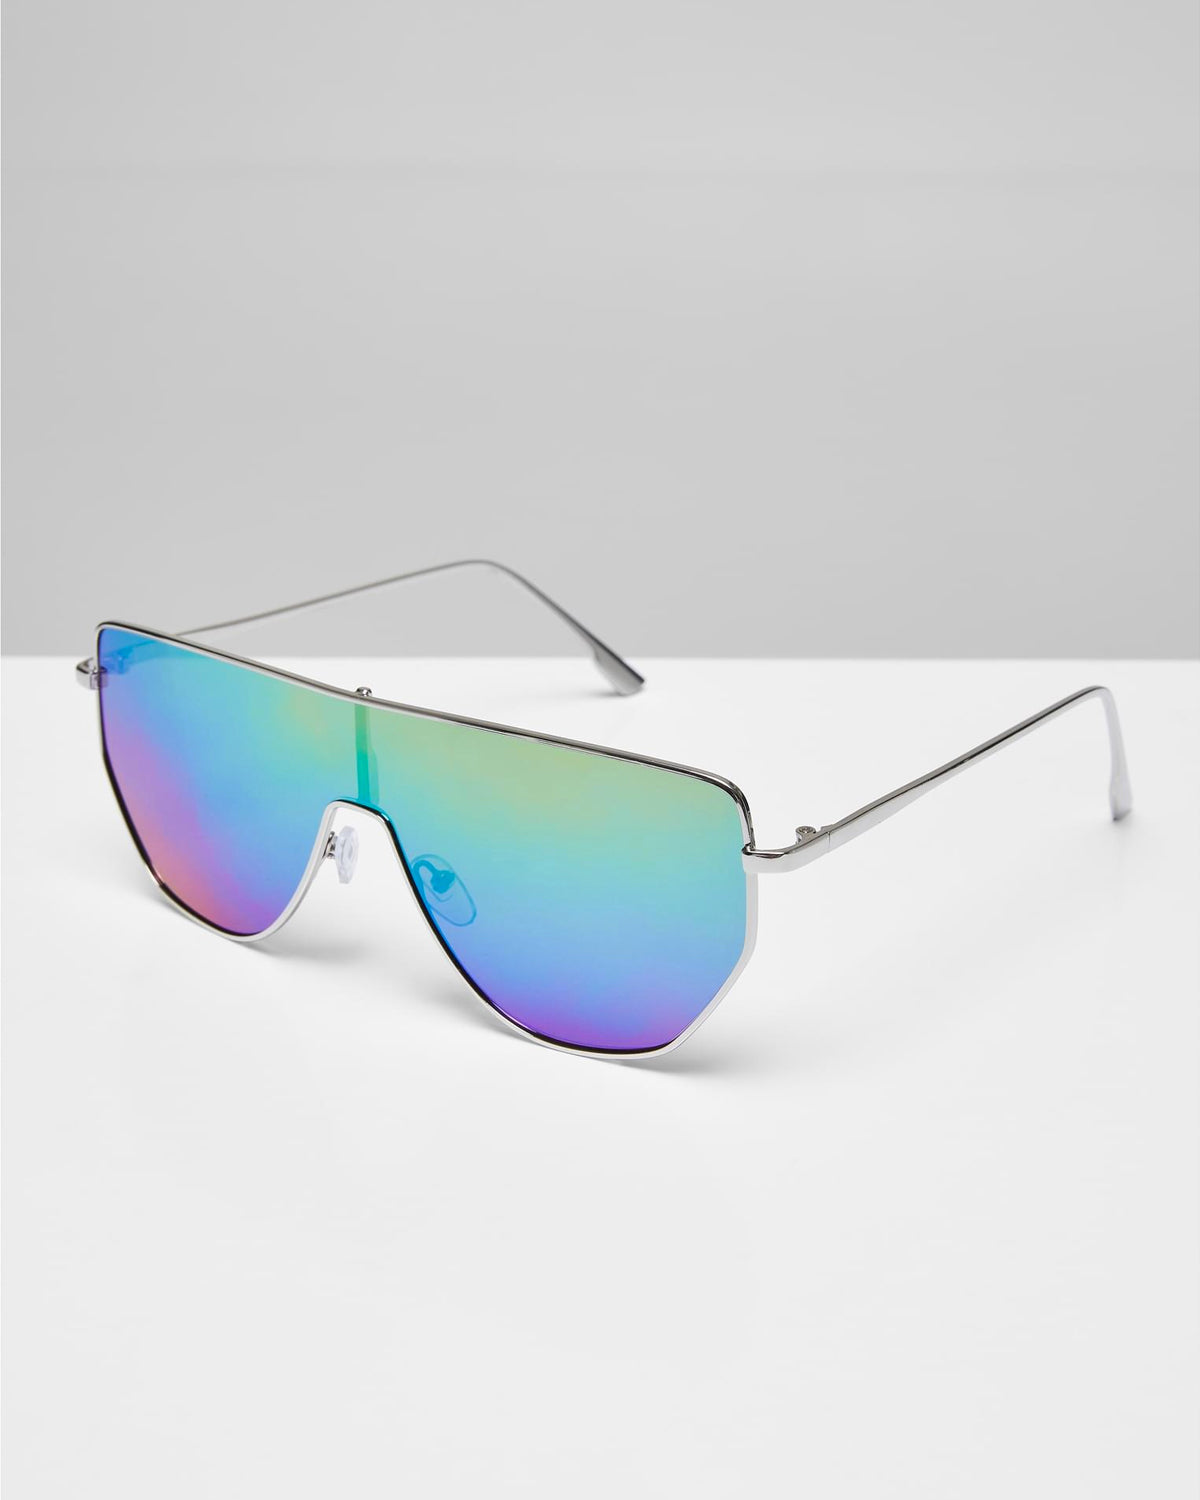 Men\'s sunglasses store online domestic from